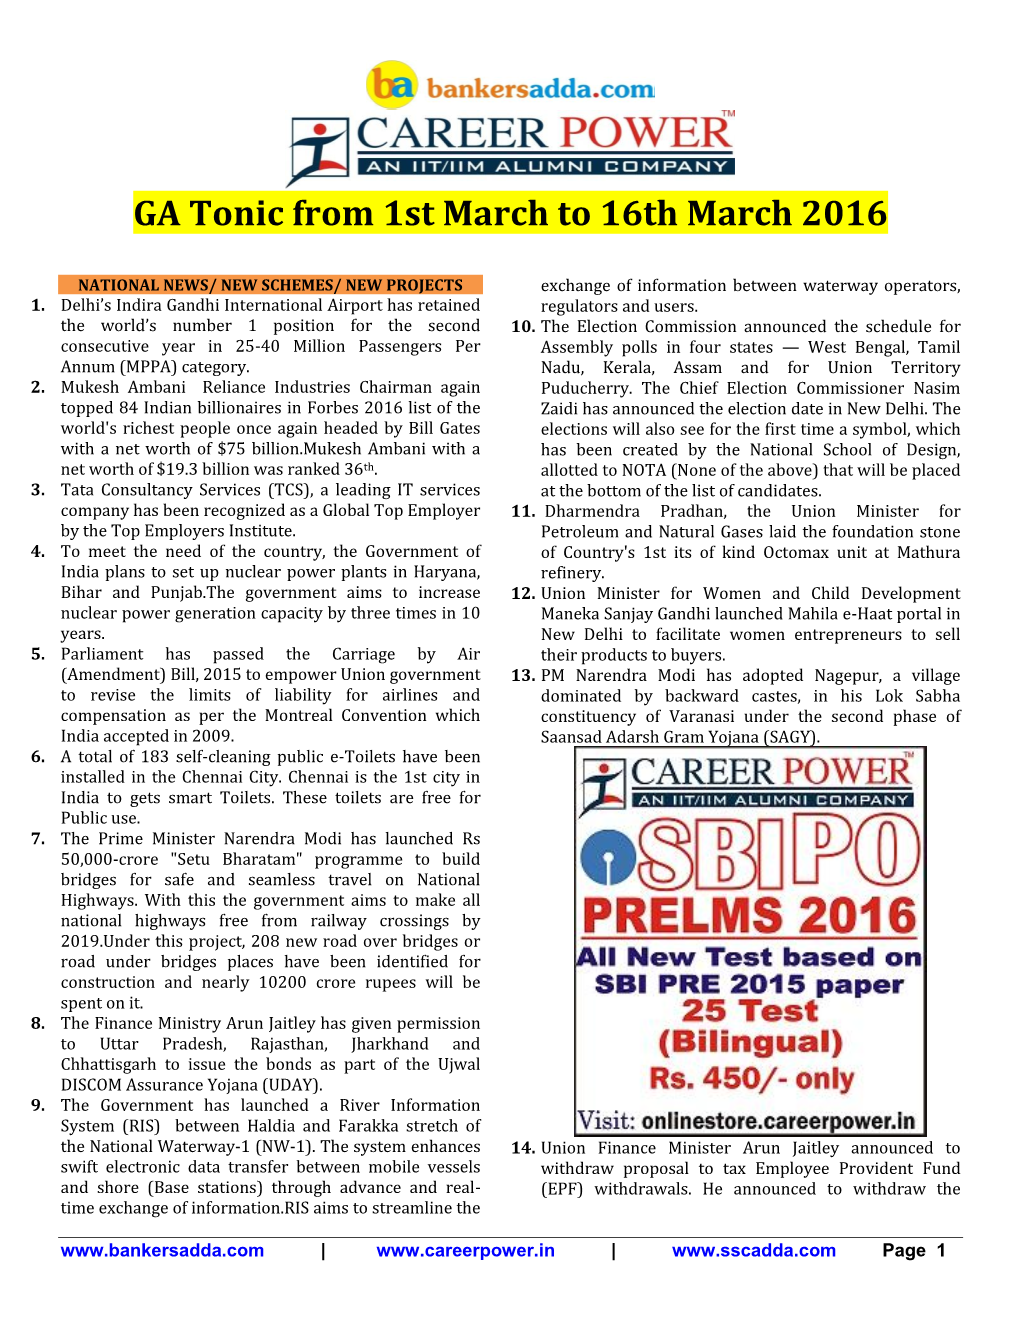 GA Tonic from 1St March to 16Th March 2016